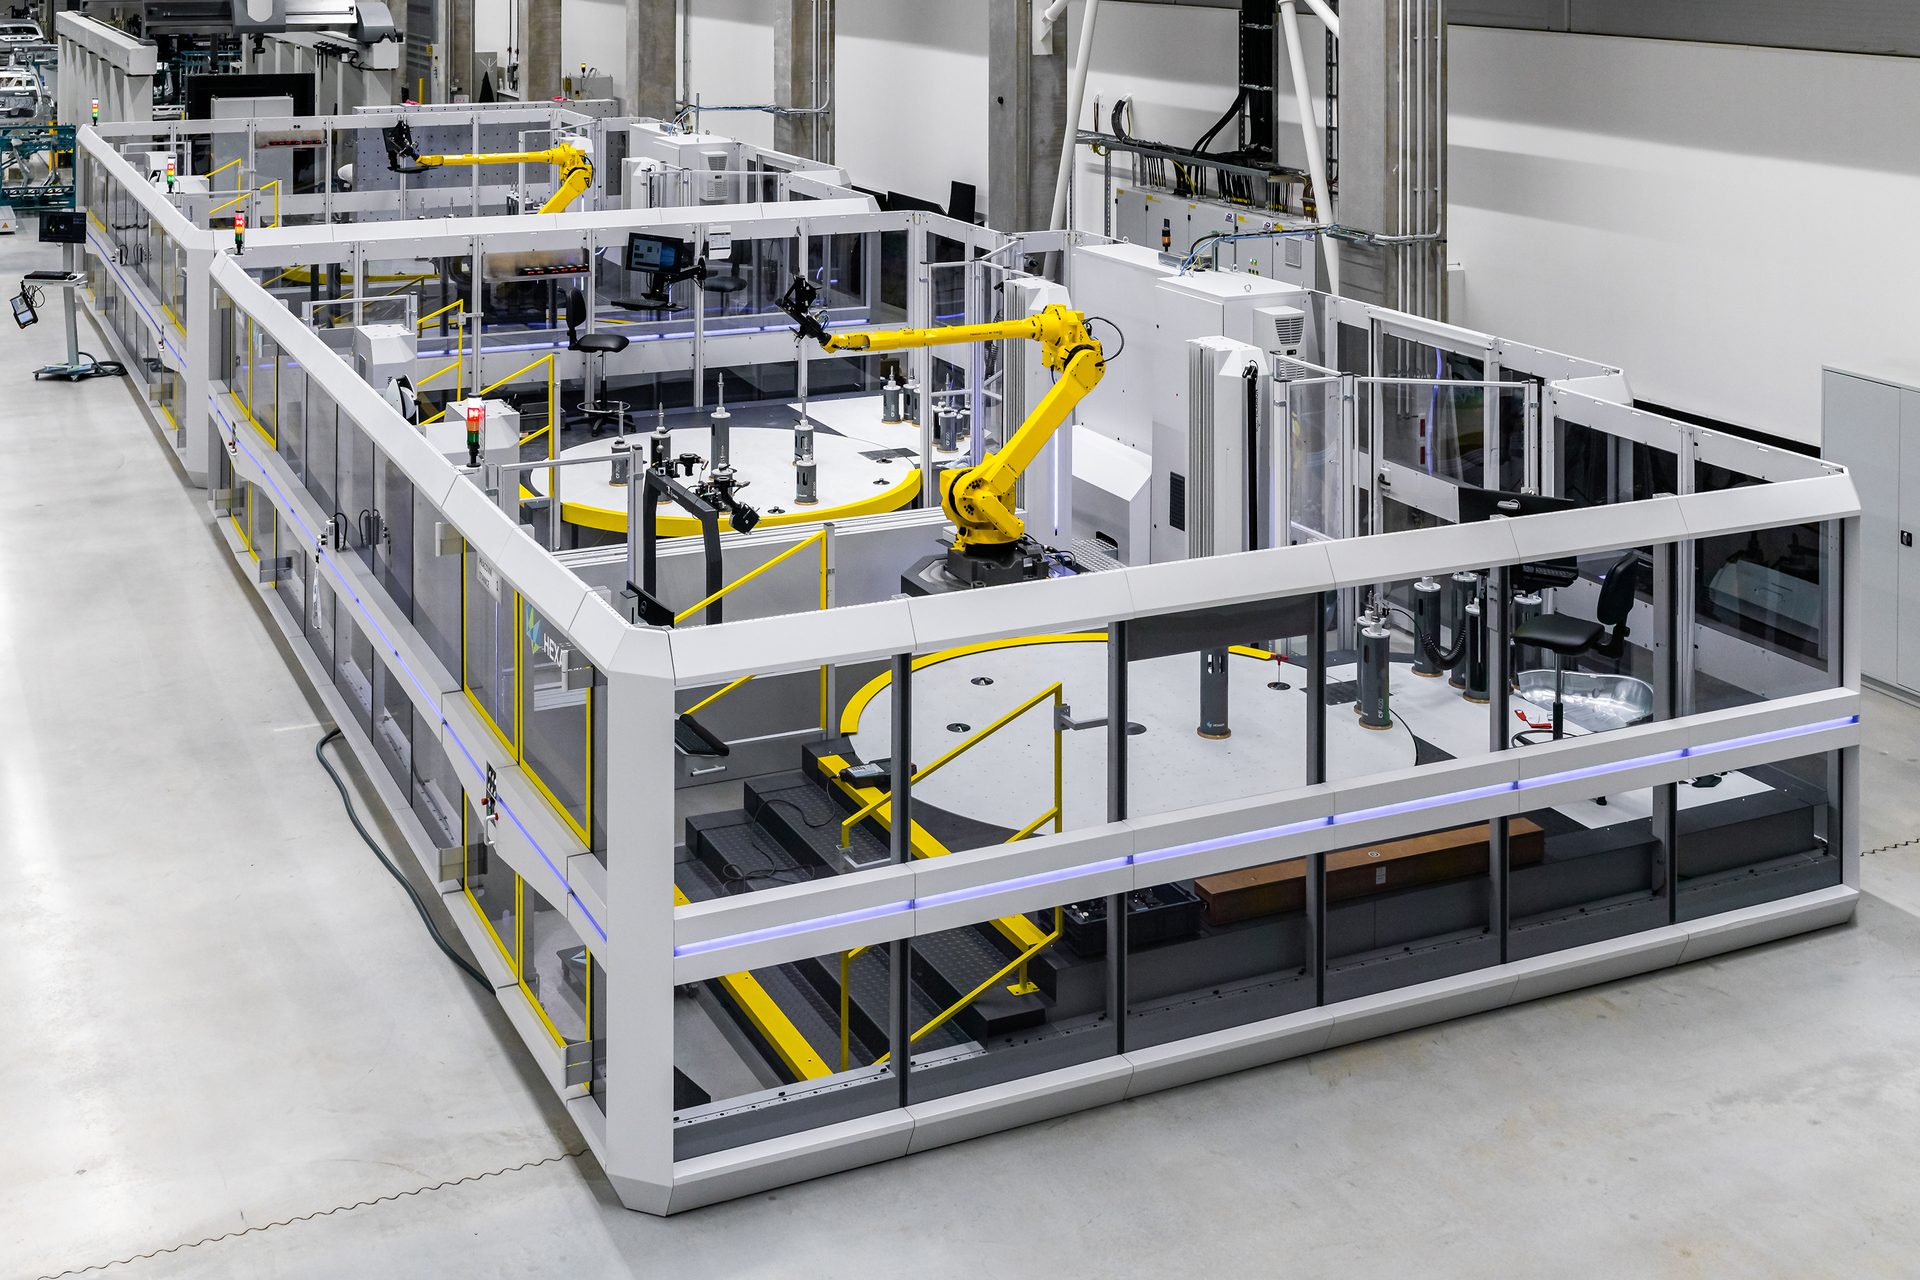 Portable measurement combined with automation solutions enables lab-grade metrology technology on the shop floor in-line, near-line, and off-line. 